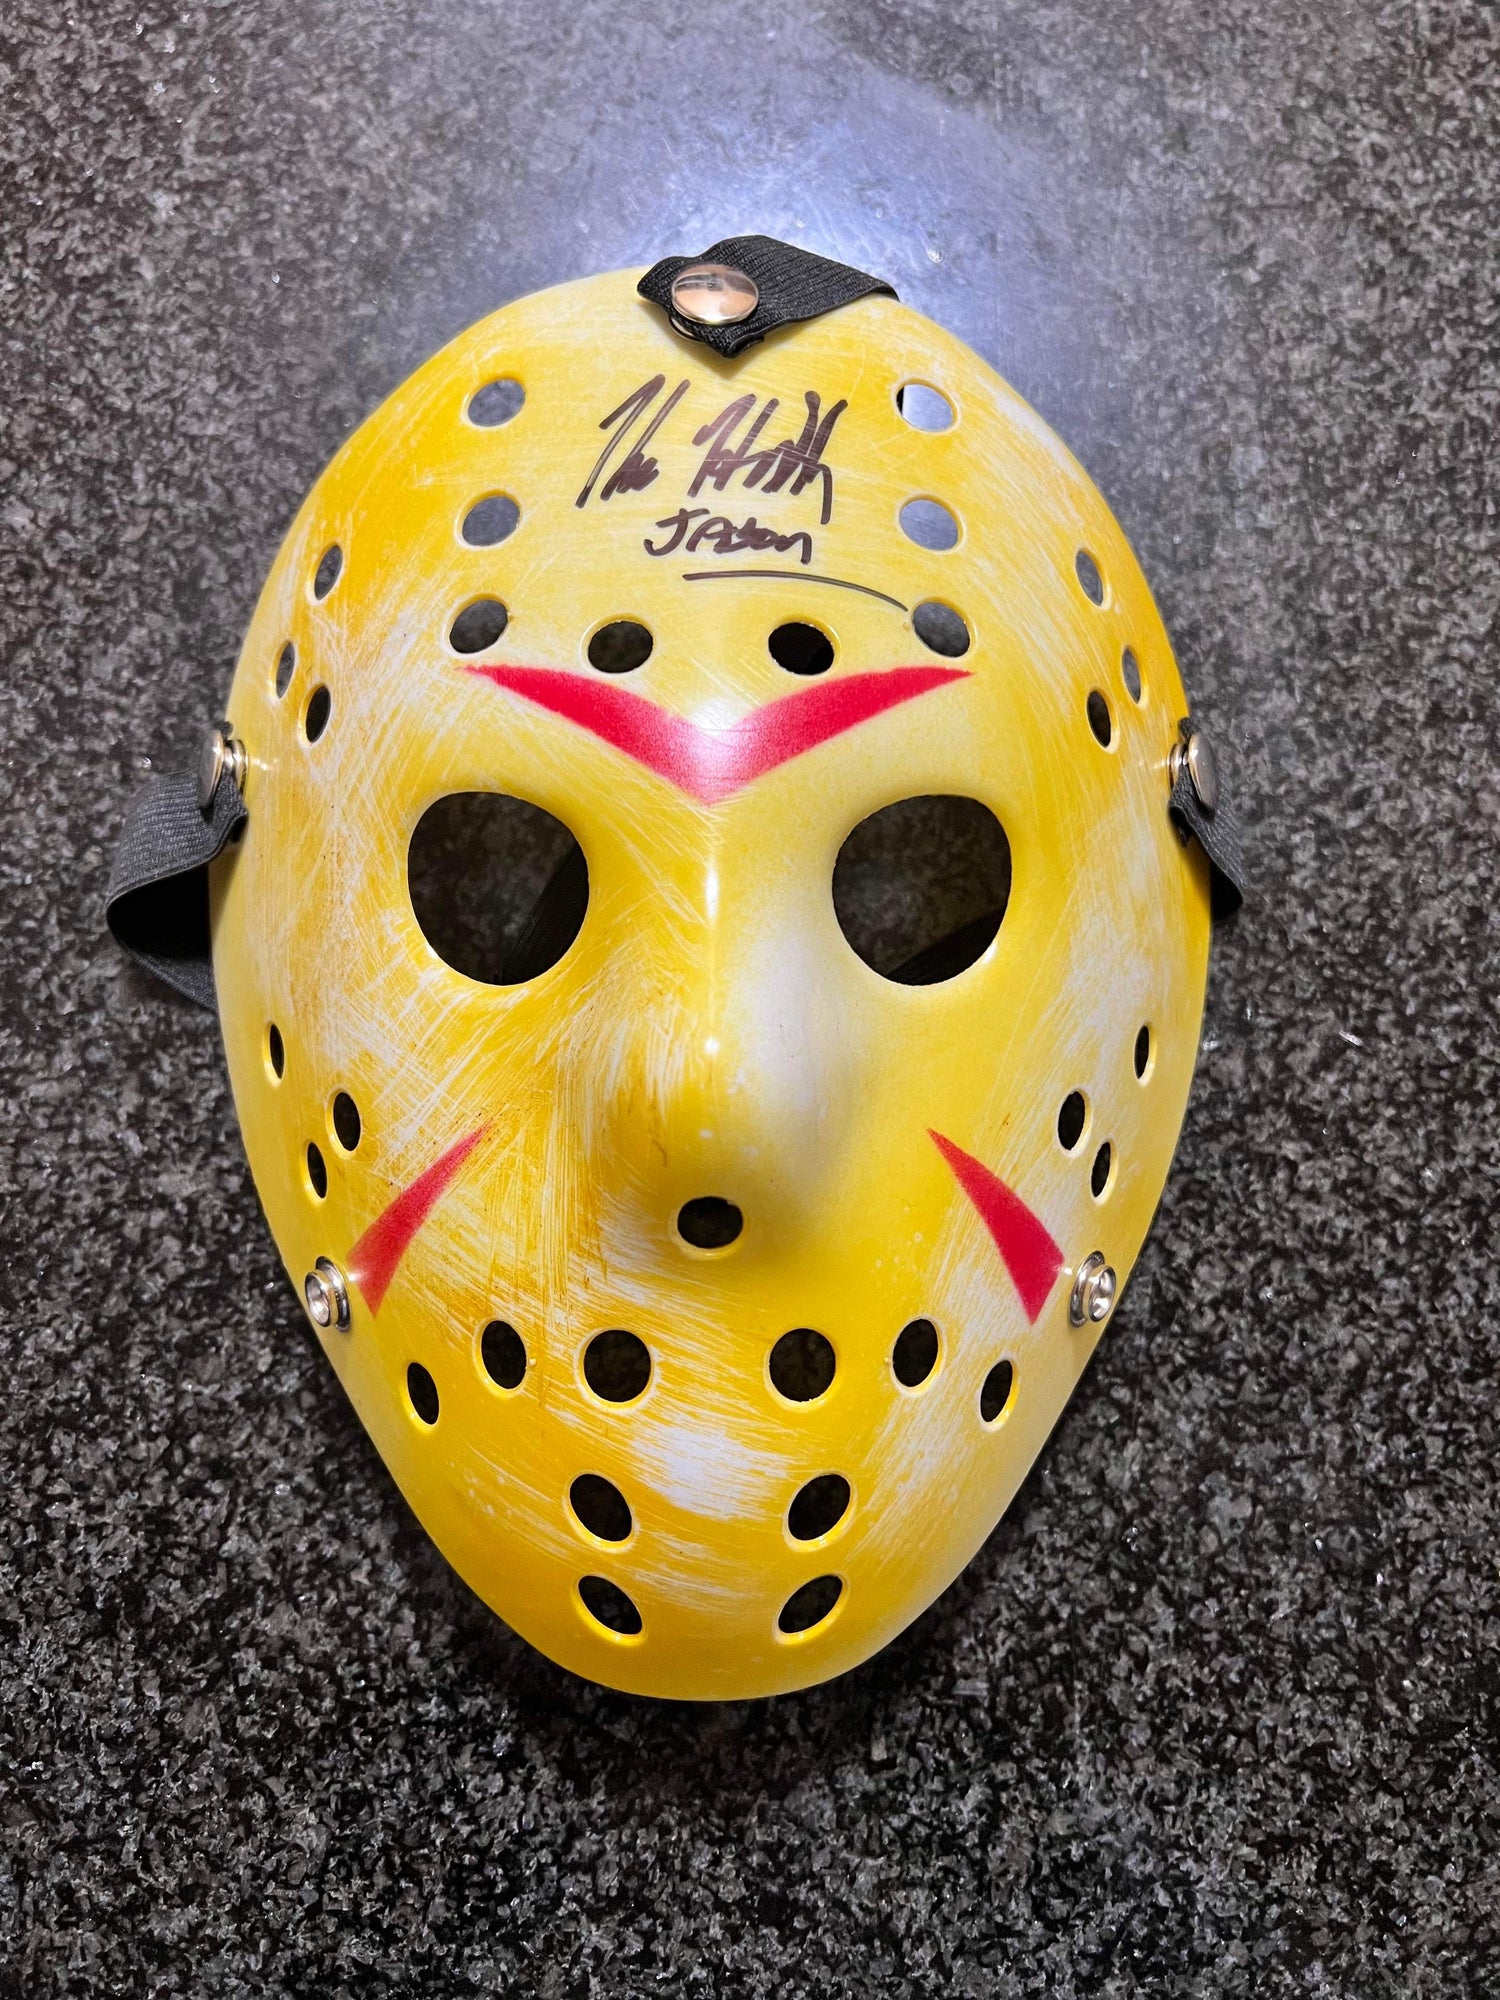 Friday The 13th Mask signed by Kane Hooder-2 Friday the 13th